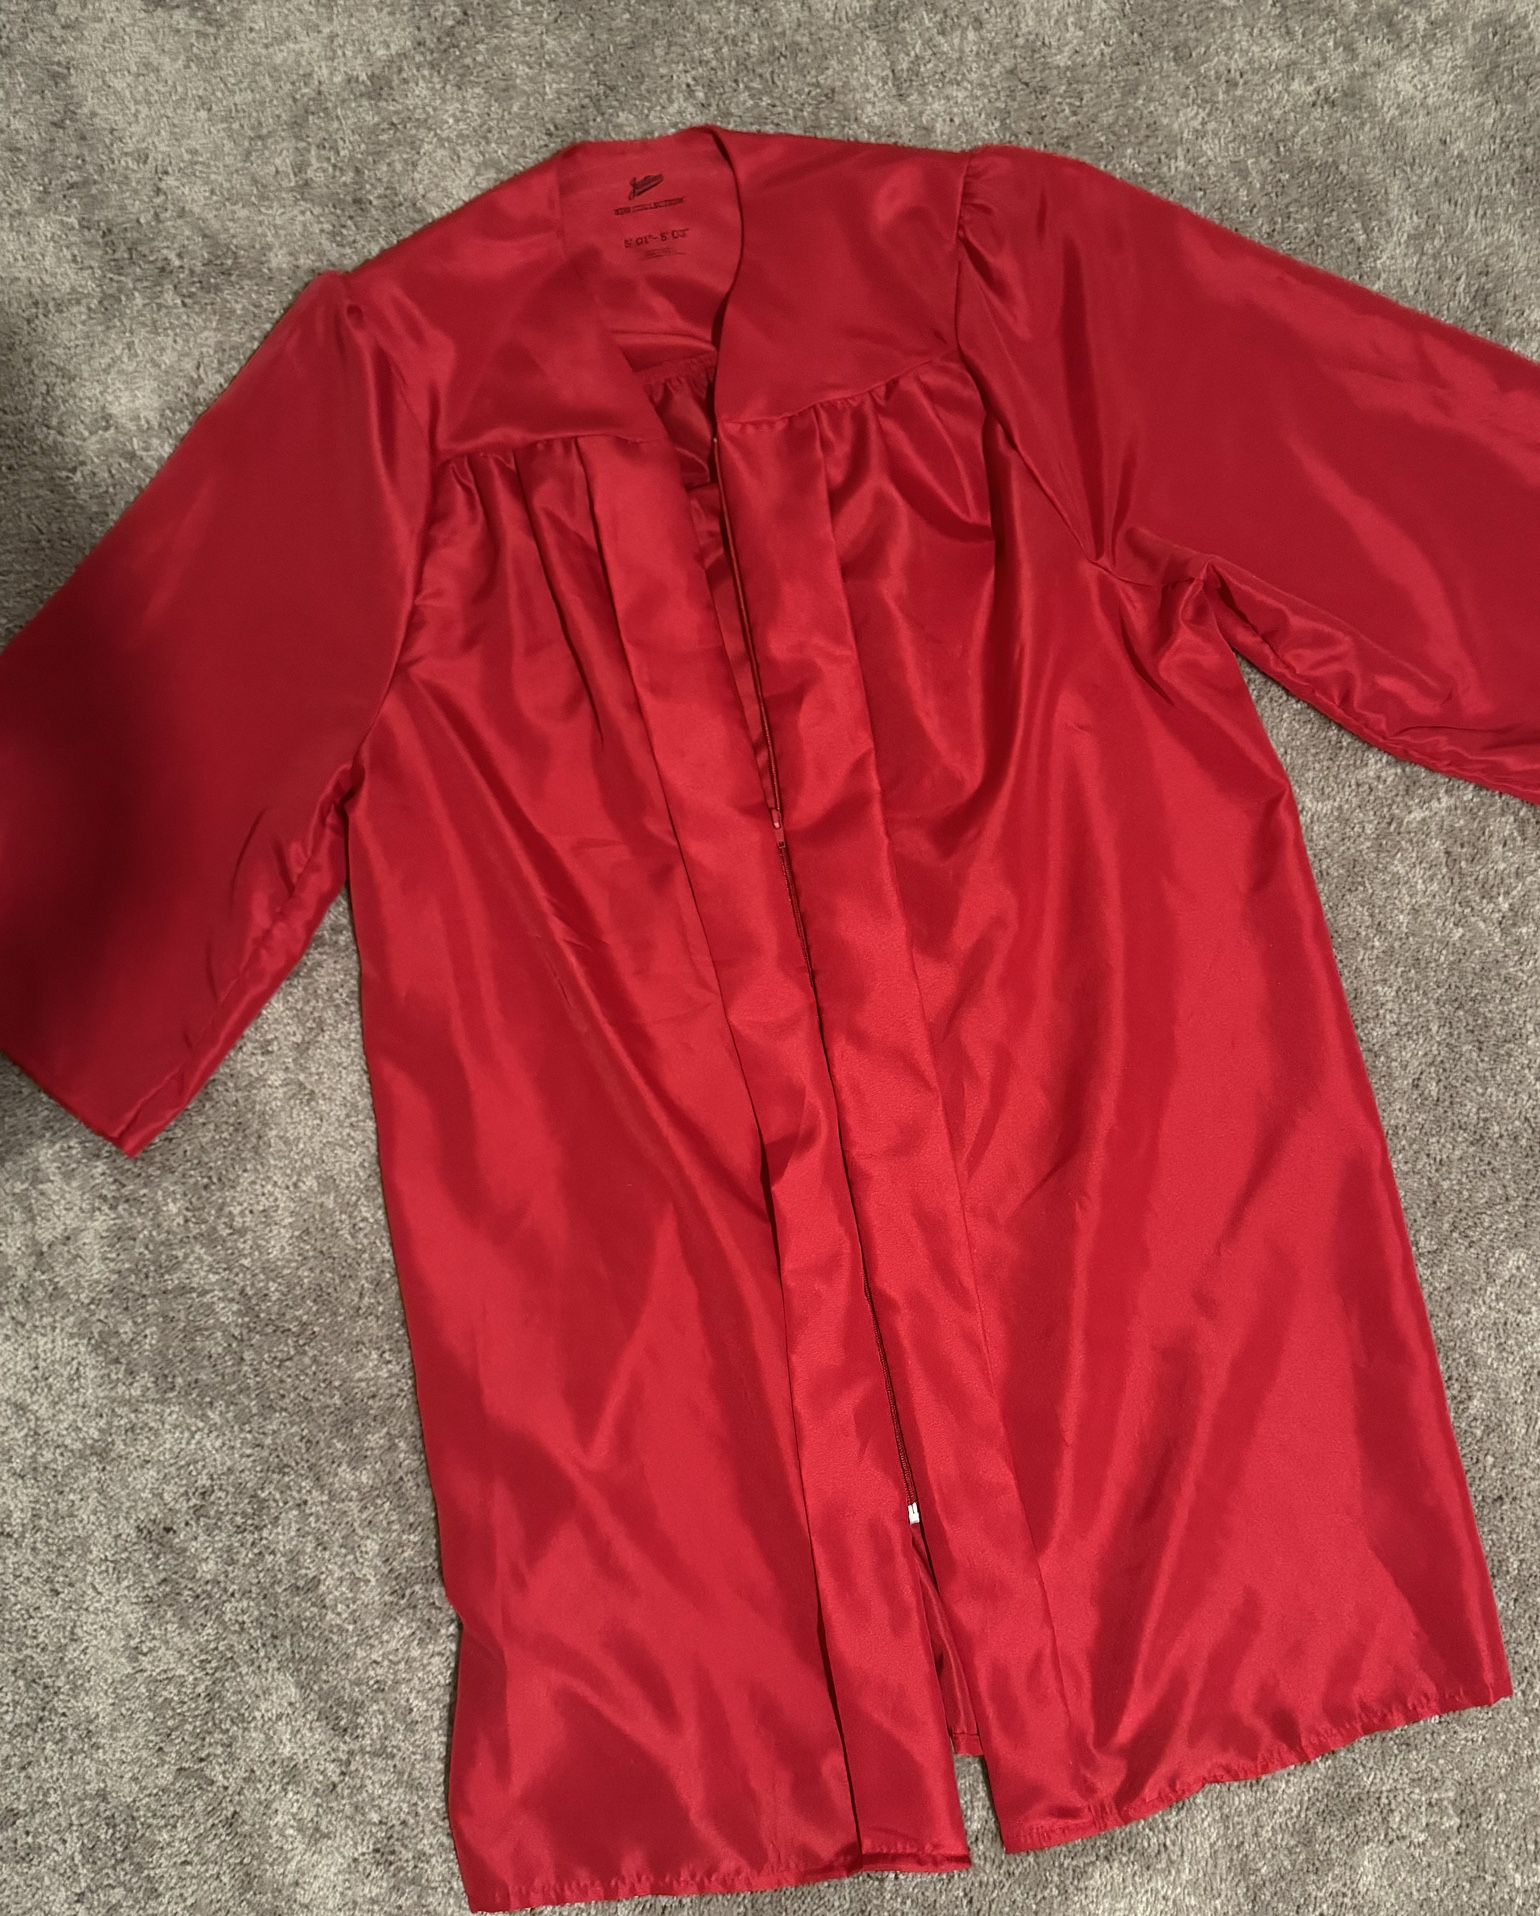 RED GRADUATION GOWN